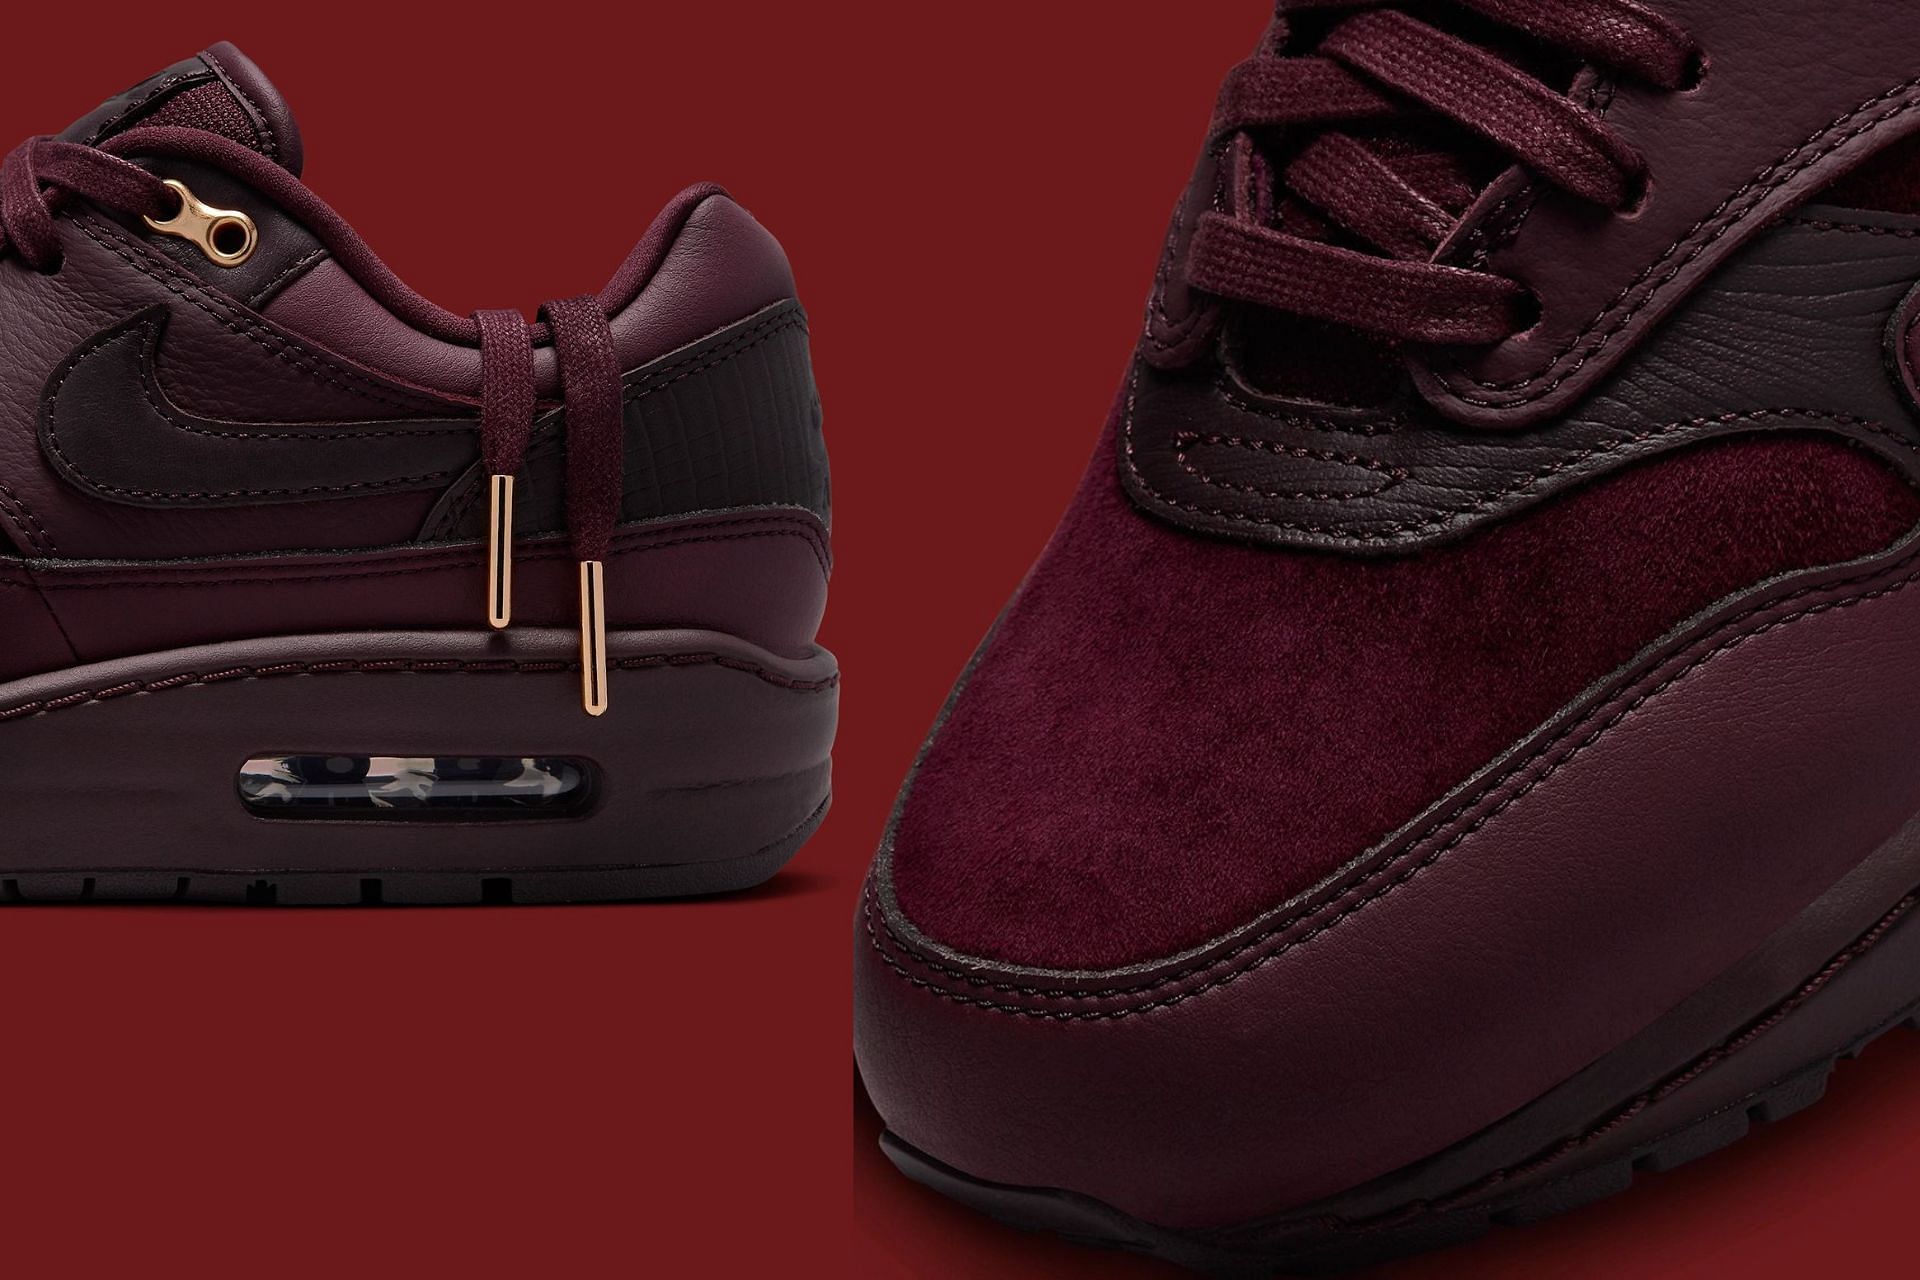 Where to buy Nike Air 1 “Burgundy Crush” shoes? Price, release date, and details explored